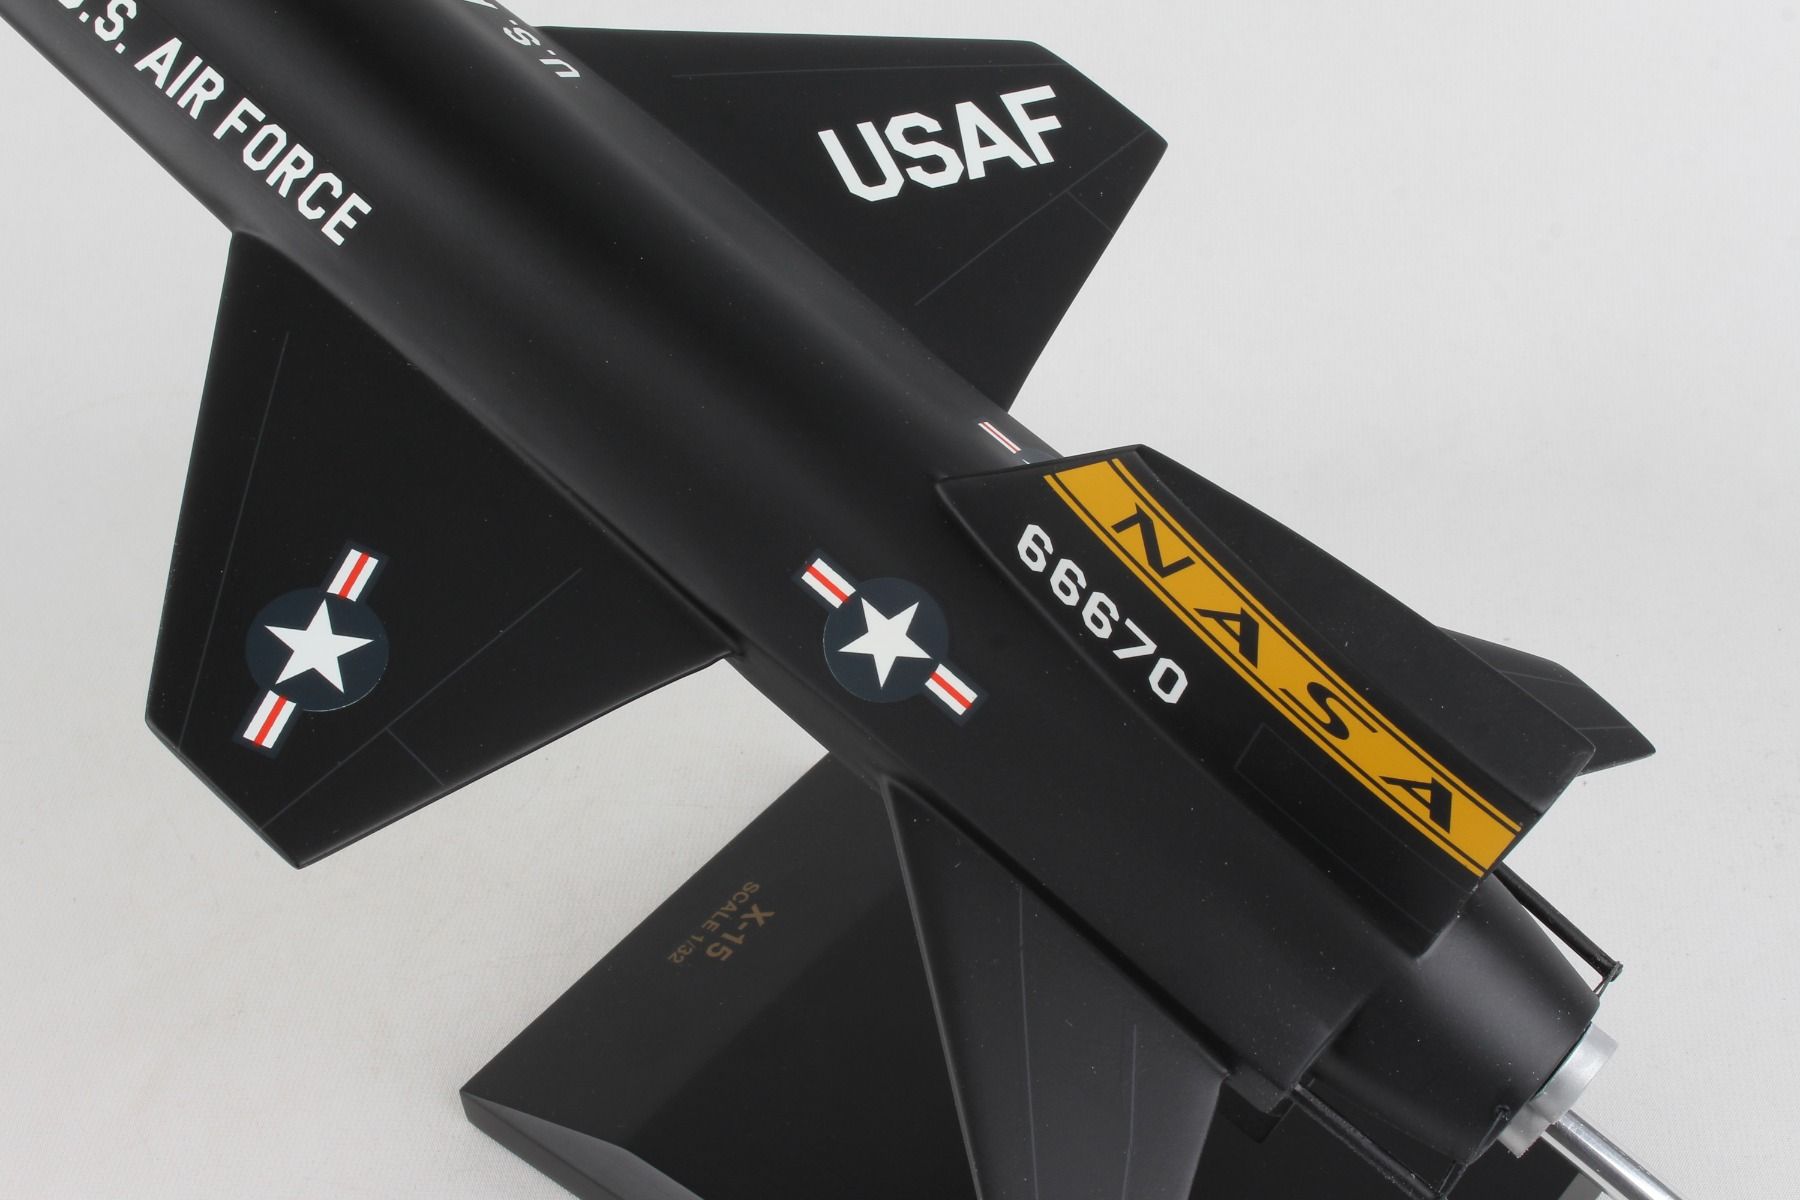 ALDO Creative Arts Collectibles Scale Model Length is 18 3/4" and wingspan is 8 1/4". / NEW / Wood NASA Airplane North American X-15 Rocket Powered Wood Model Aircraft